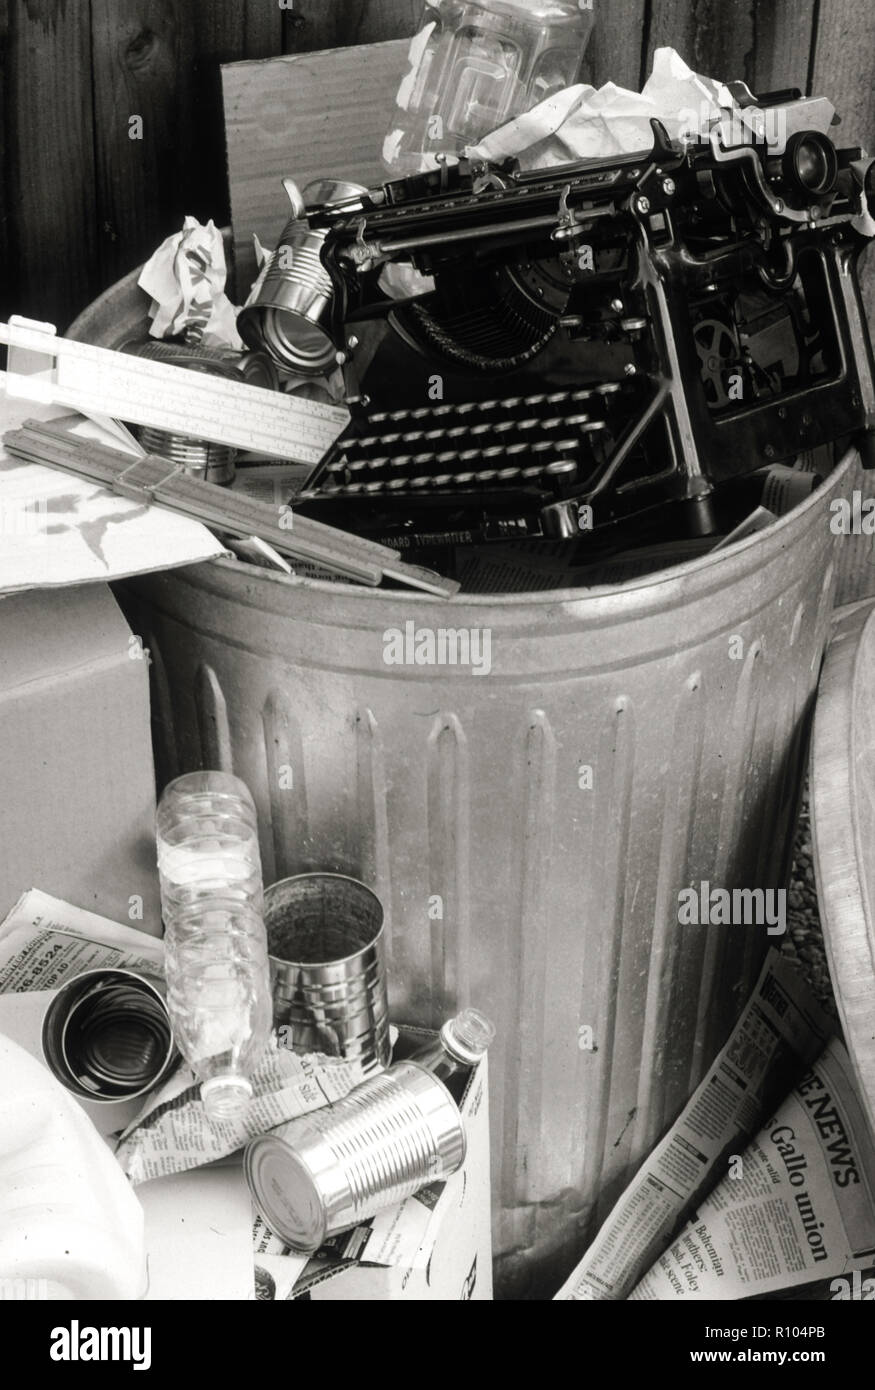 Outdated technology thrown in trash can, USA Stock Photo